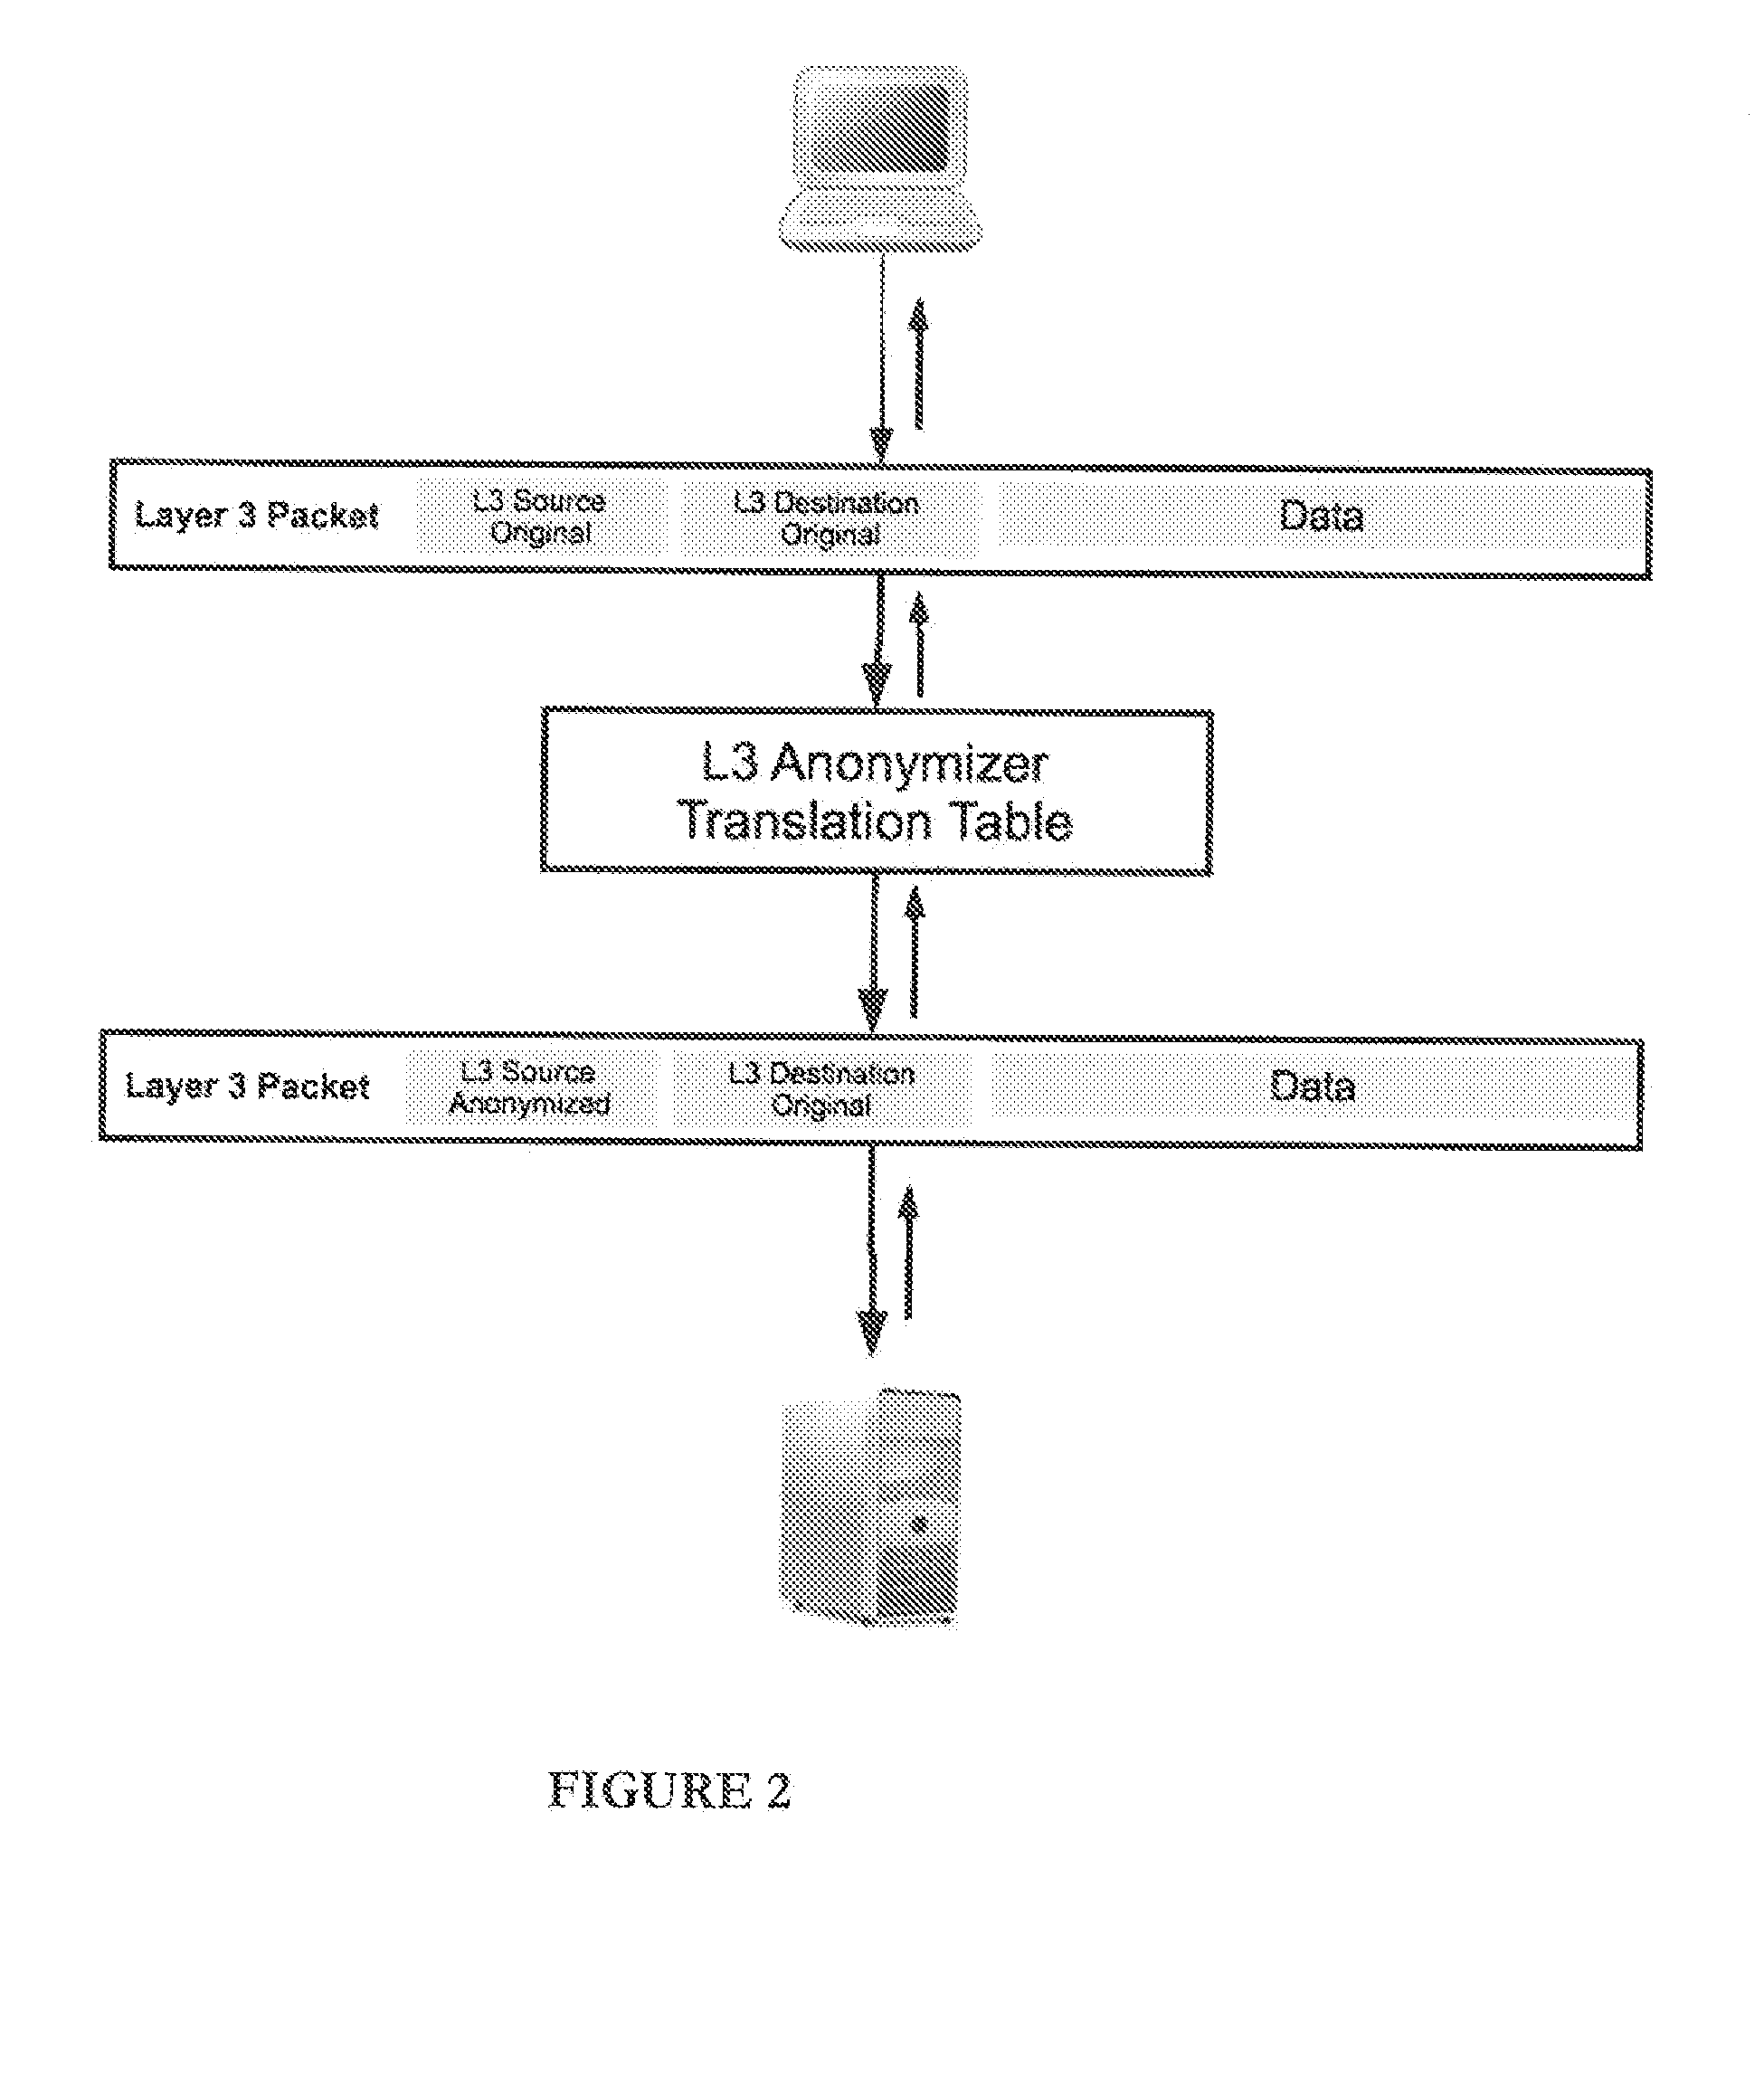 System and method for controlling, obfuscating and anonymizing data and services when using provider services